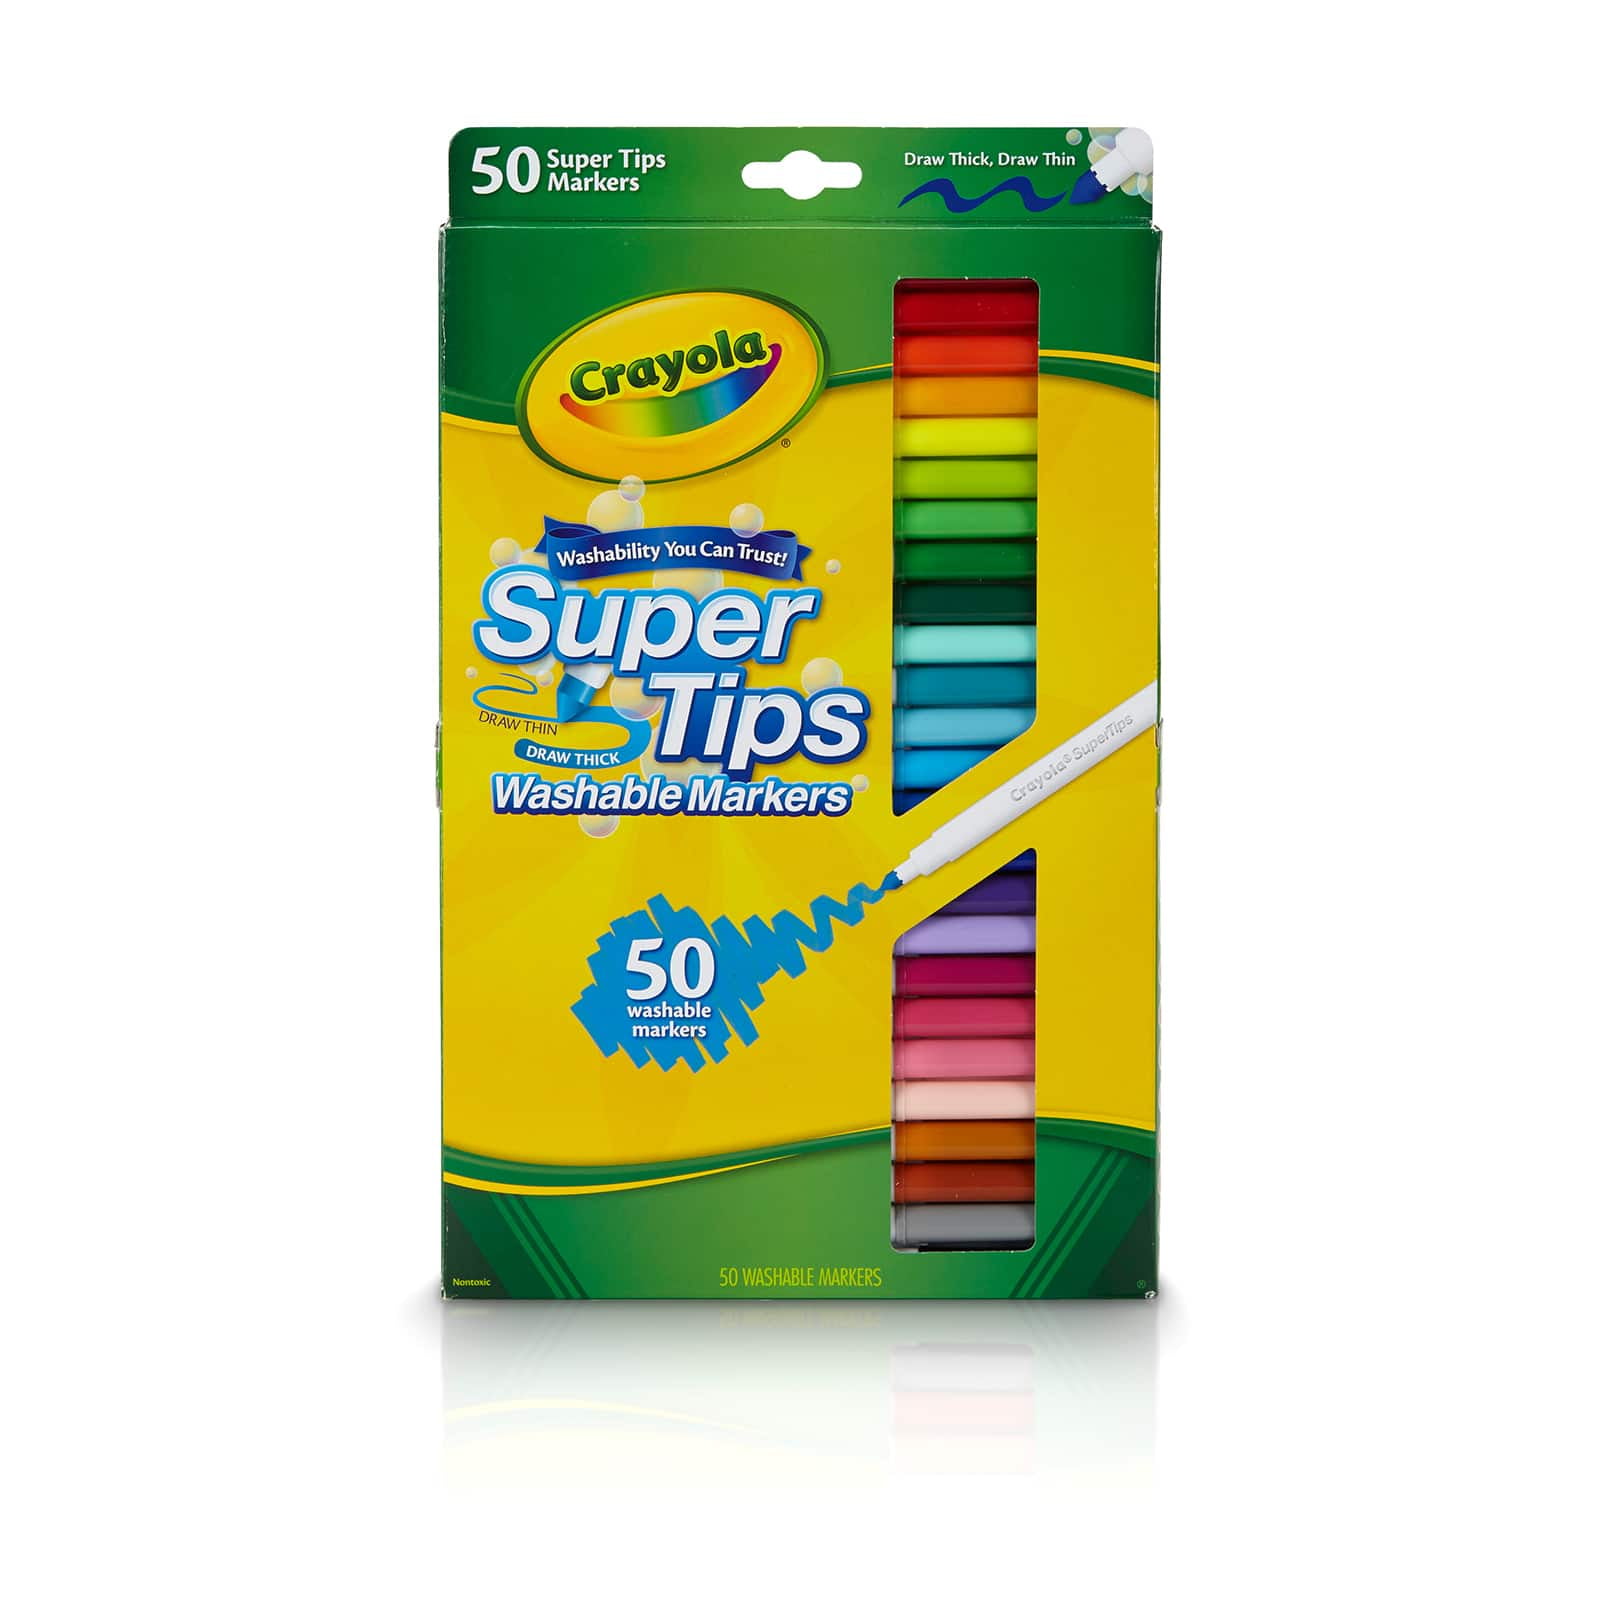 8 Packs: 50 ct. (400 total) Crayola Super Tips Washable Markers - 2